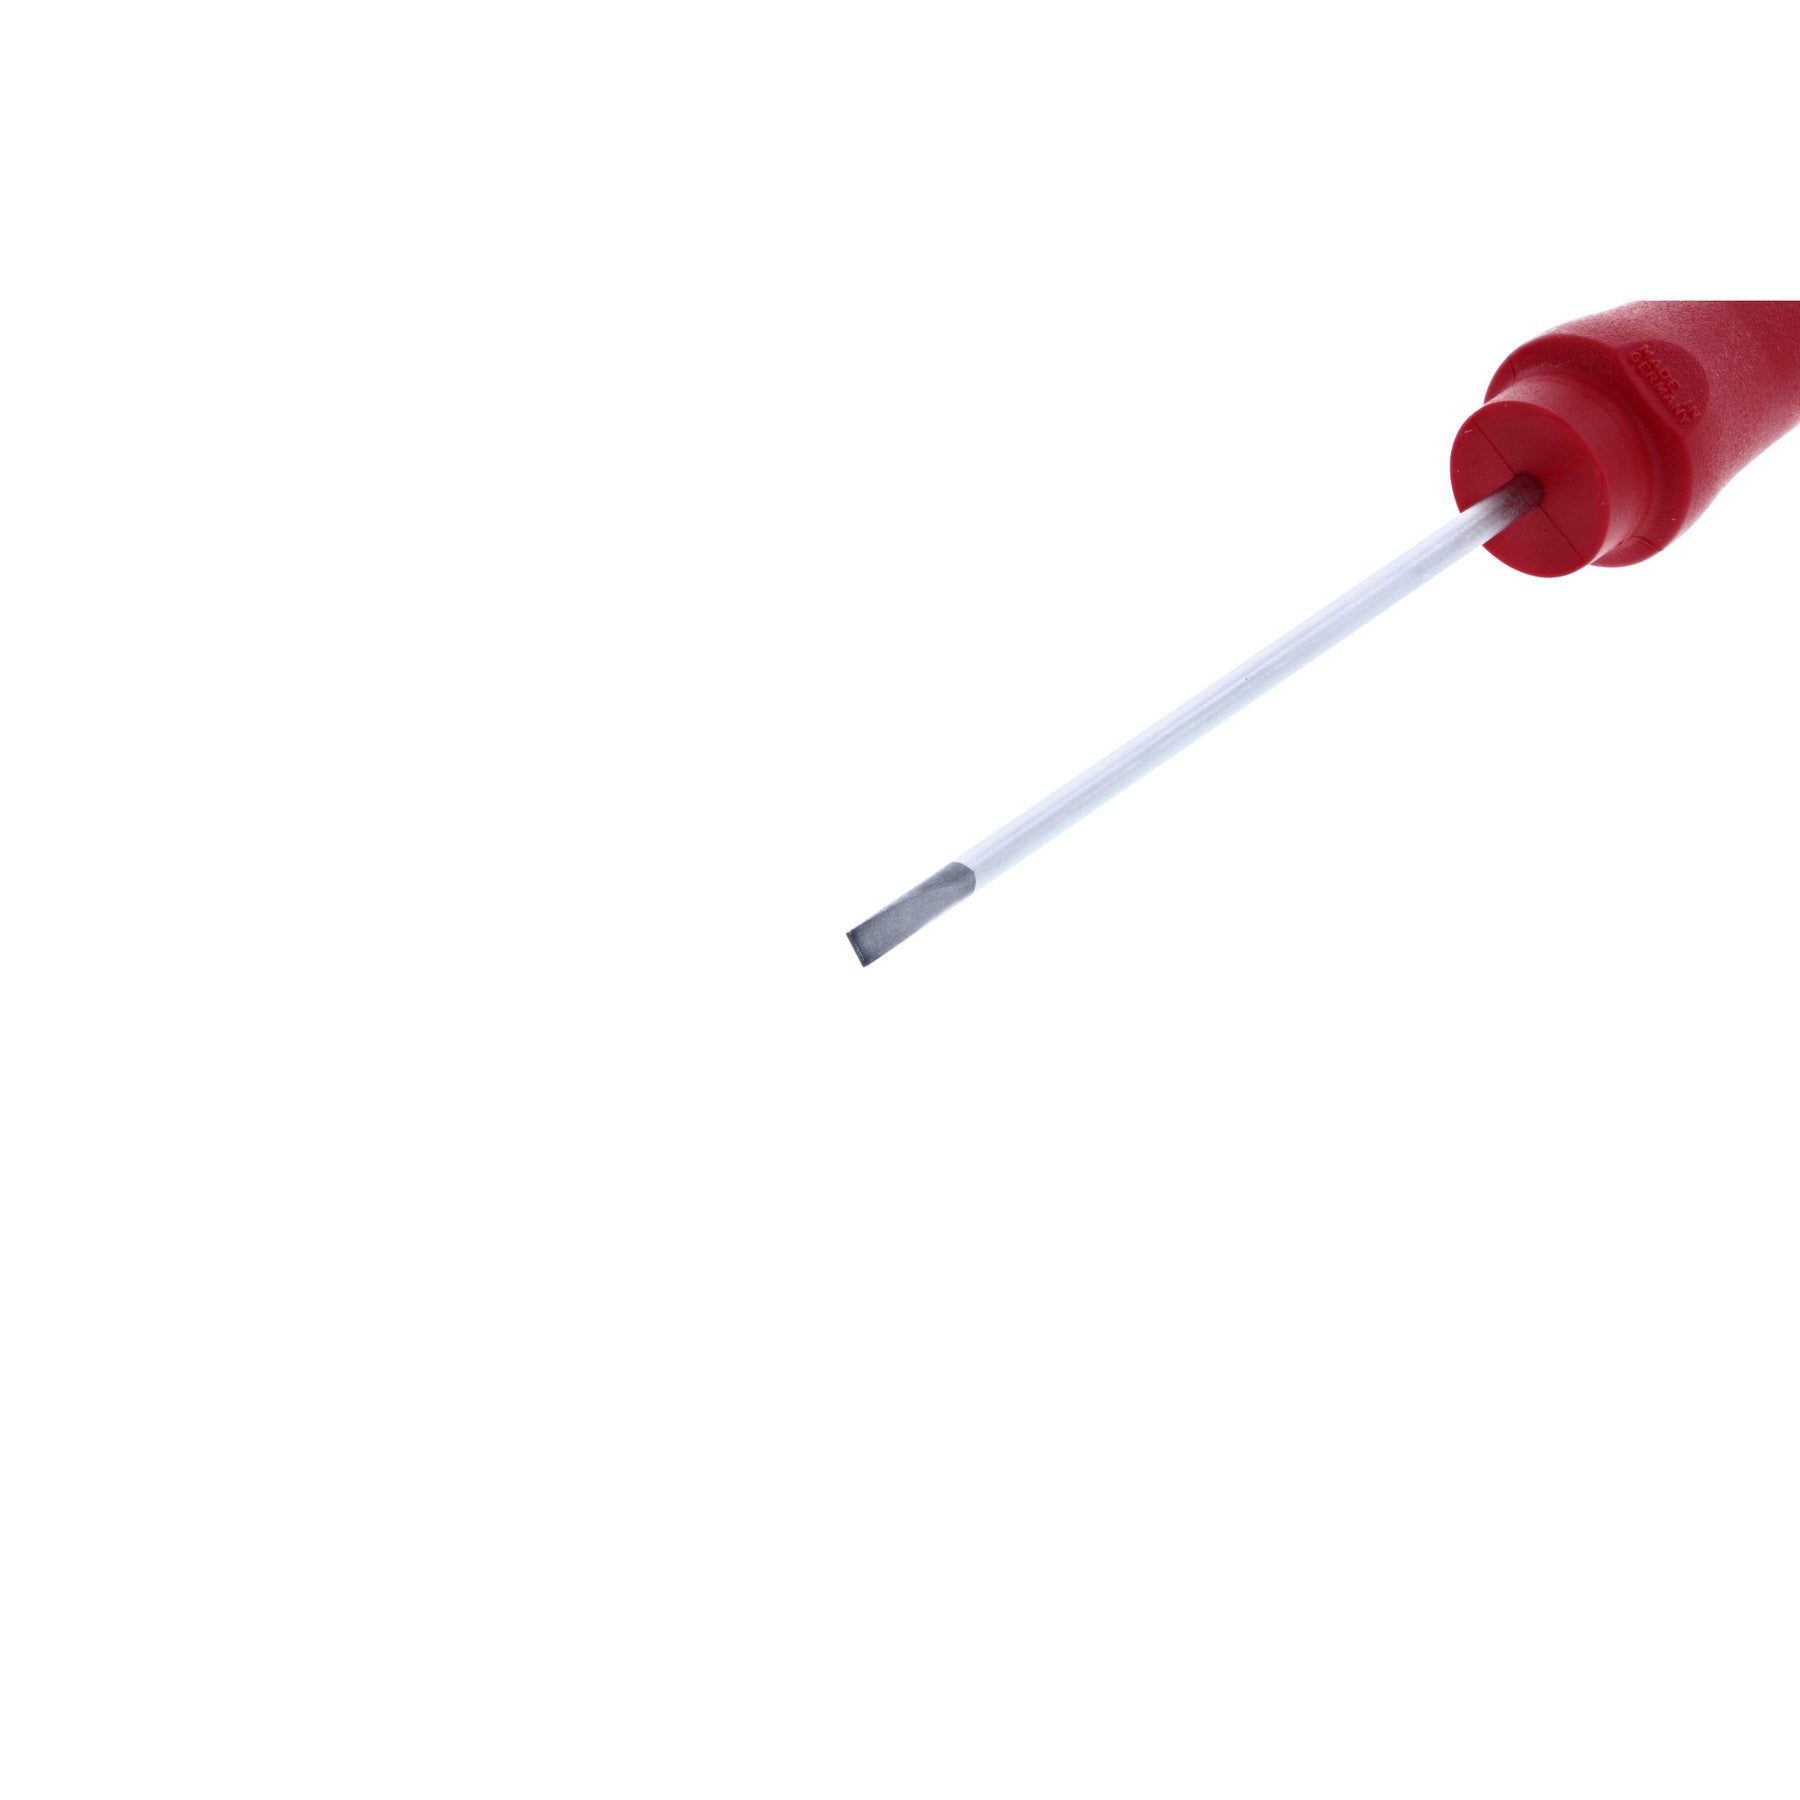 SoftFinish Slotted Screwdriver 2.5mm x 75mm